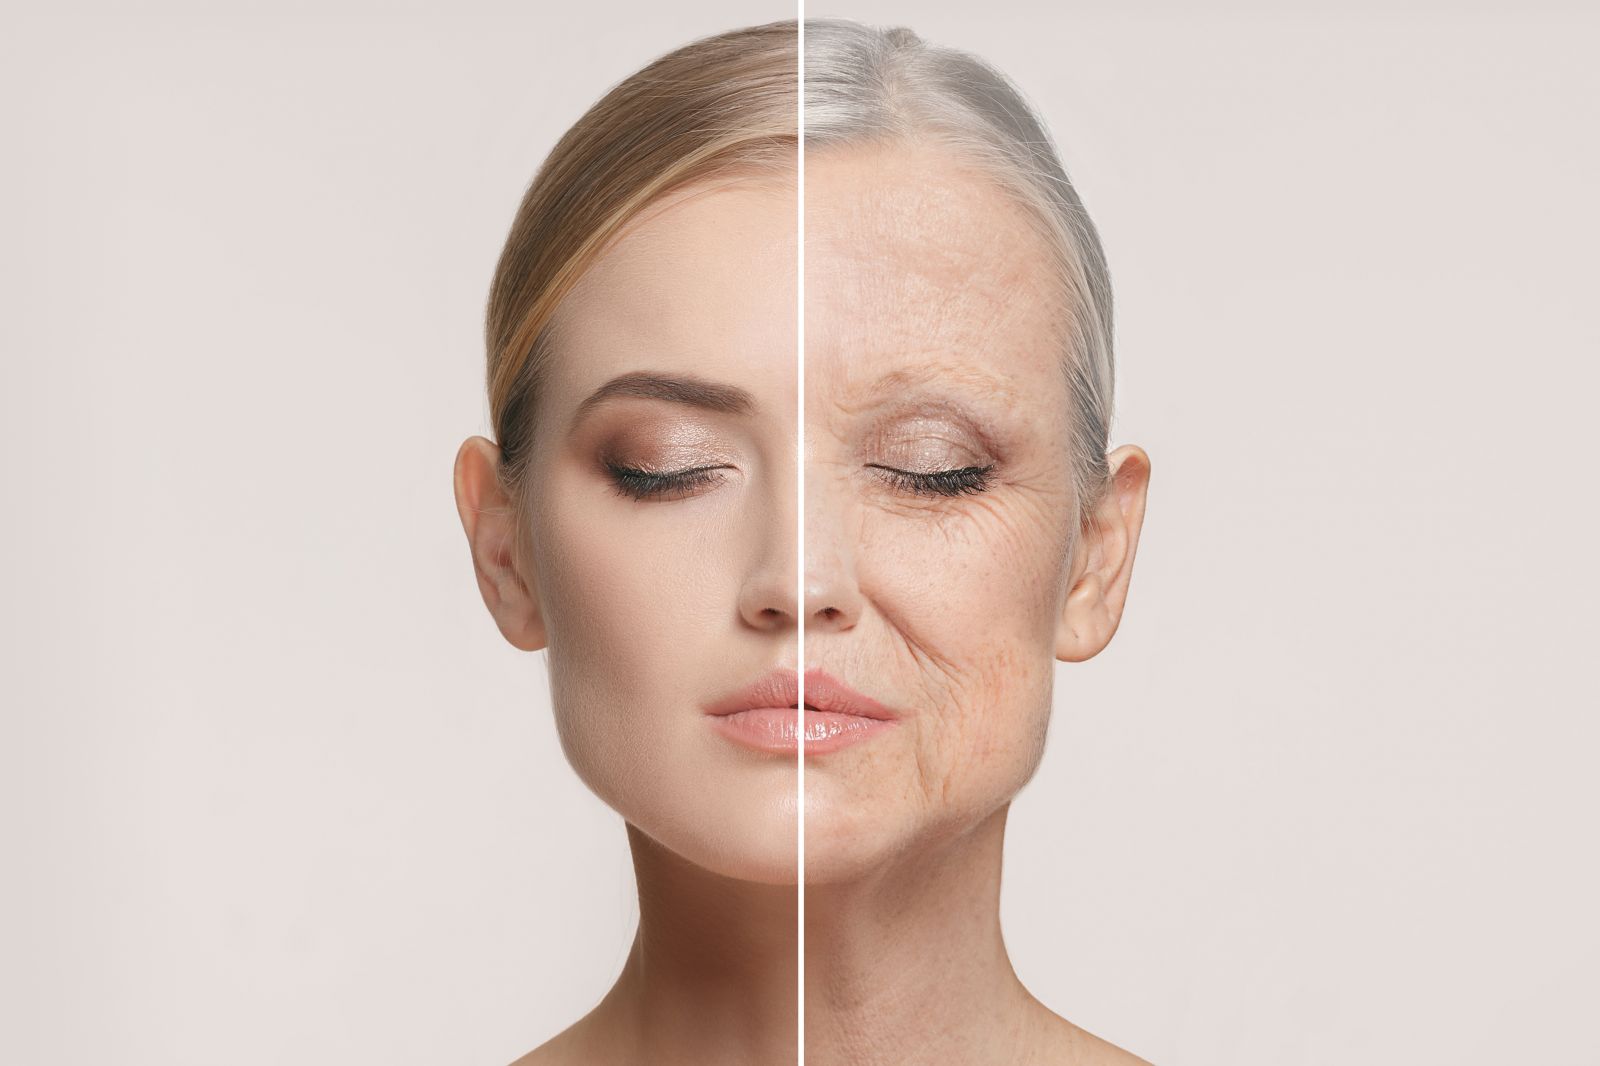 How to Reduce Wrinkles Without Pain and Surgery